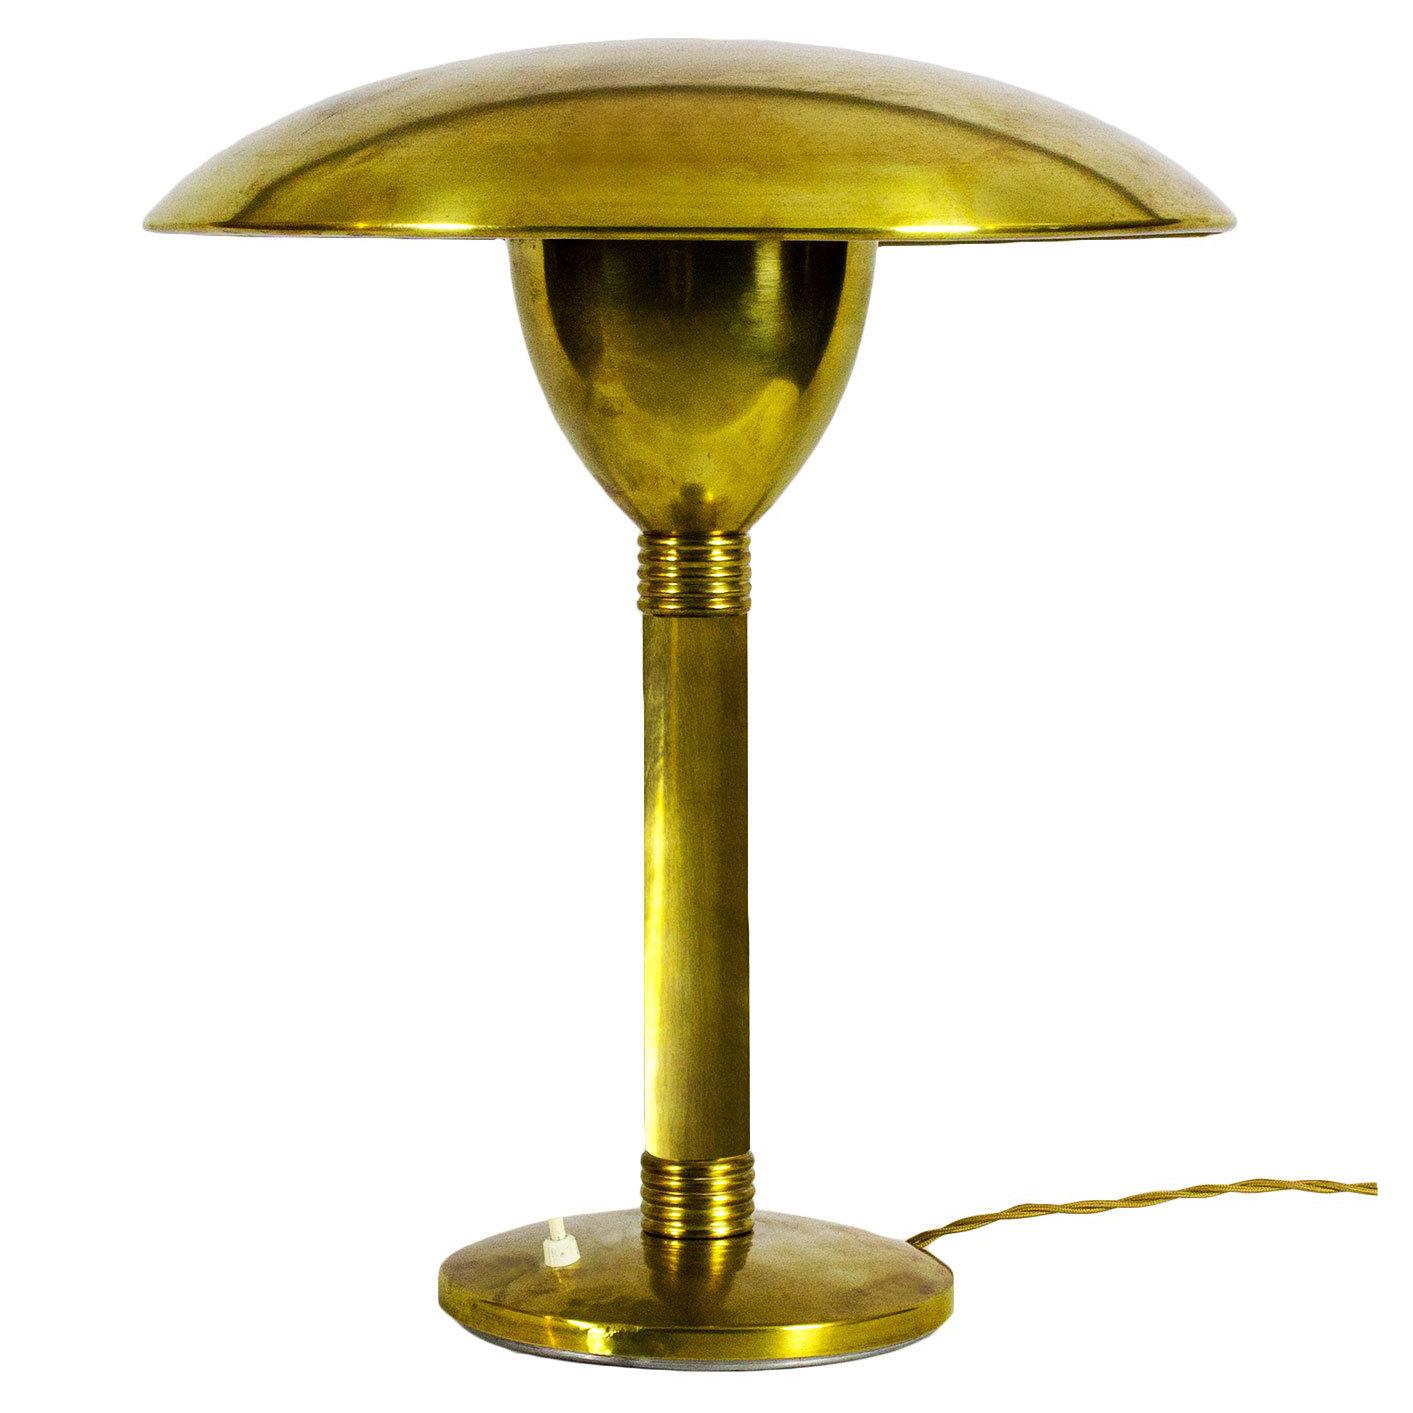 1930s Large Art Deco Table or Desk Lamp, Brass and Ivory Lacquer - Italy